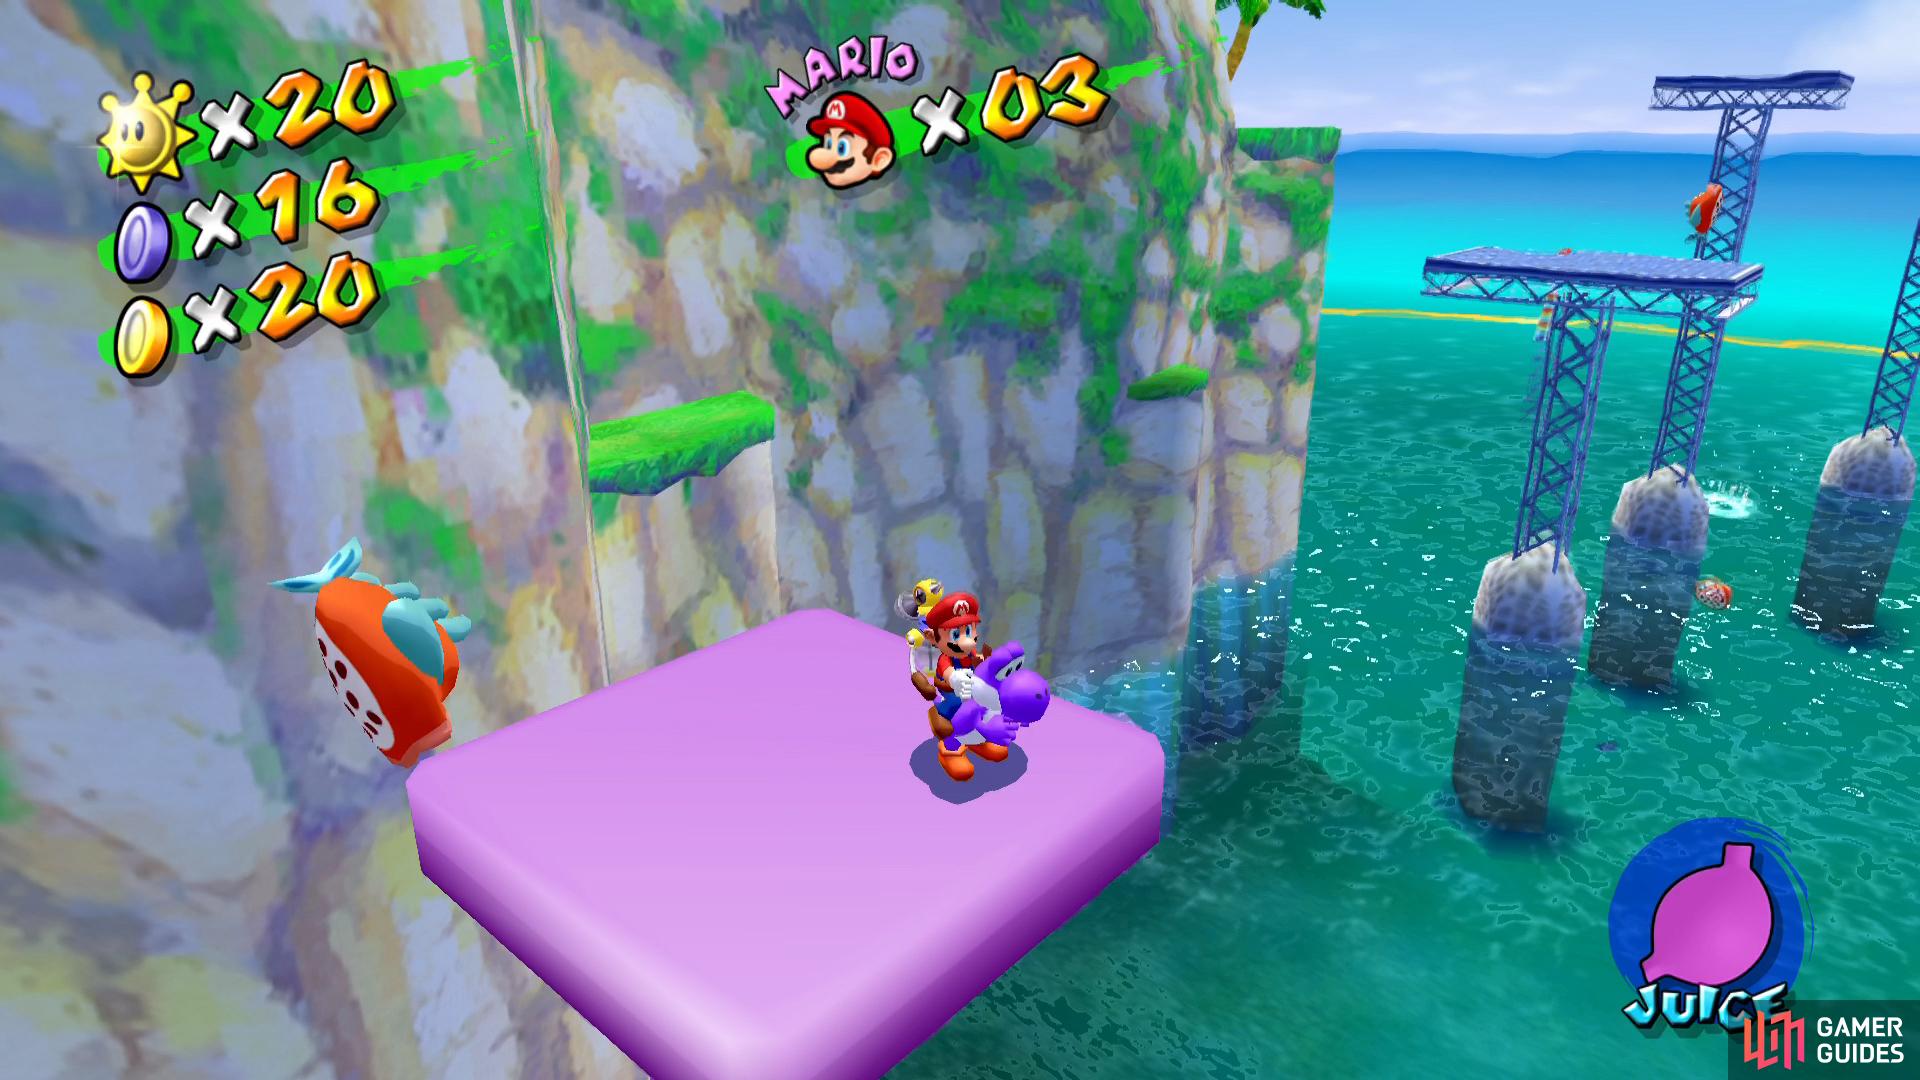 then use Yoshi's Juice to create Purple horizontal moving platforms by shooting the fish.